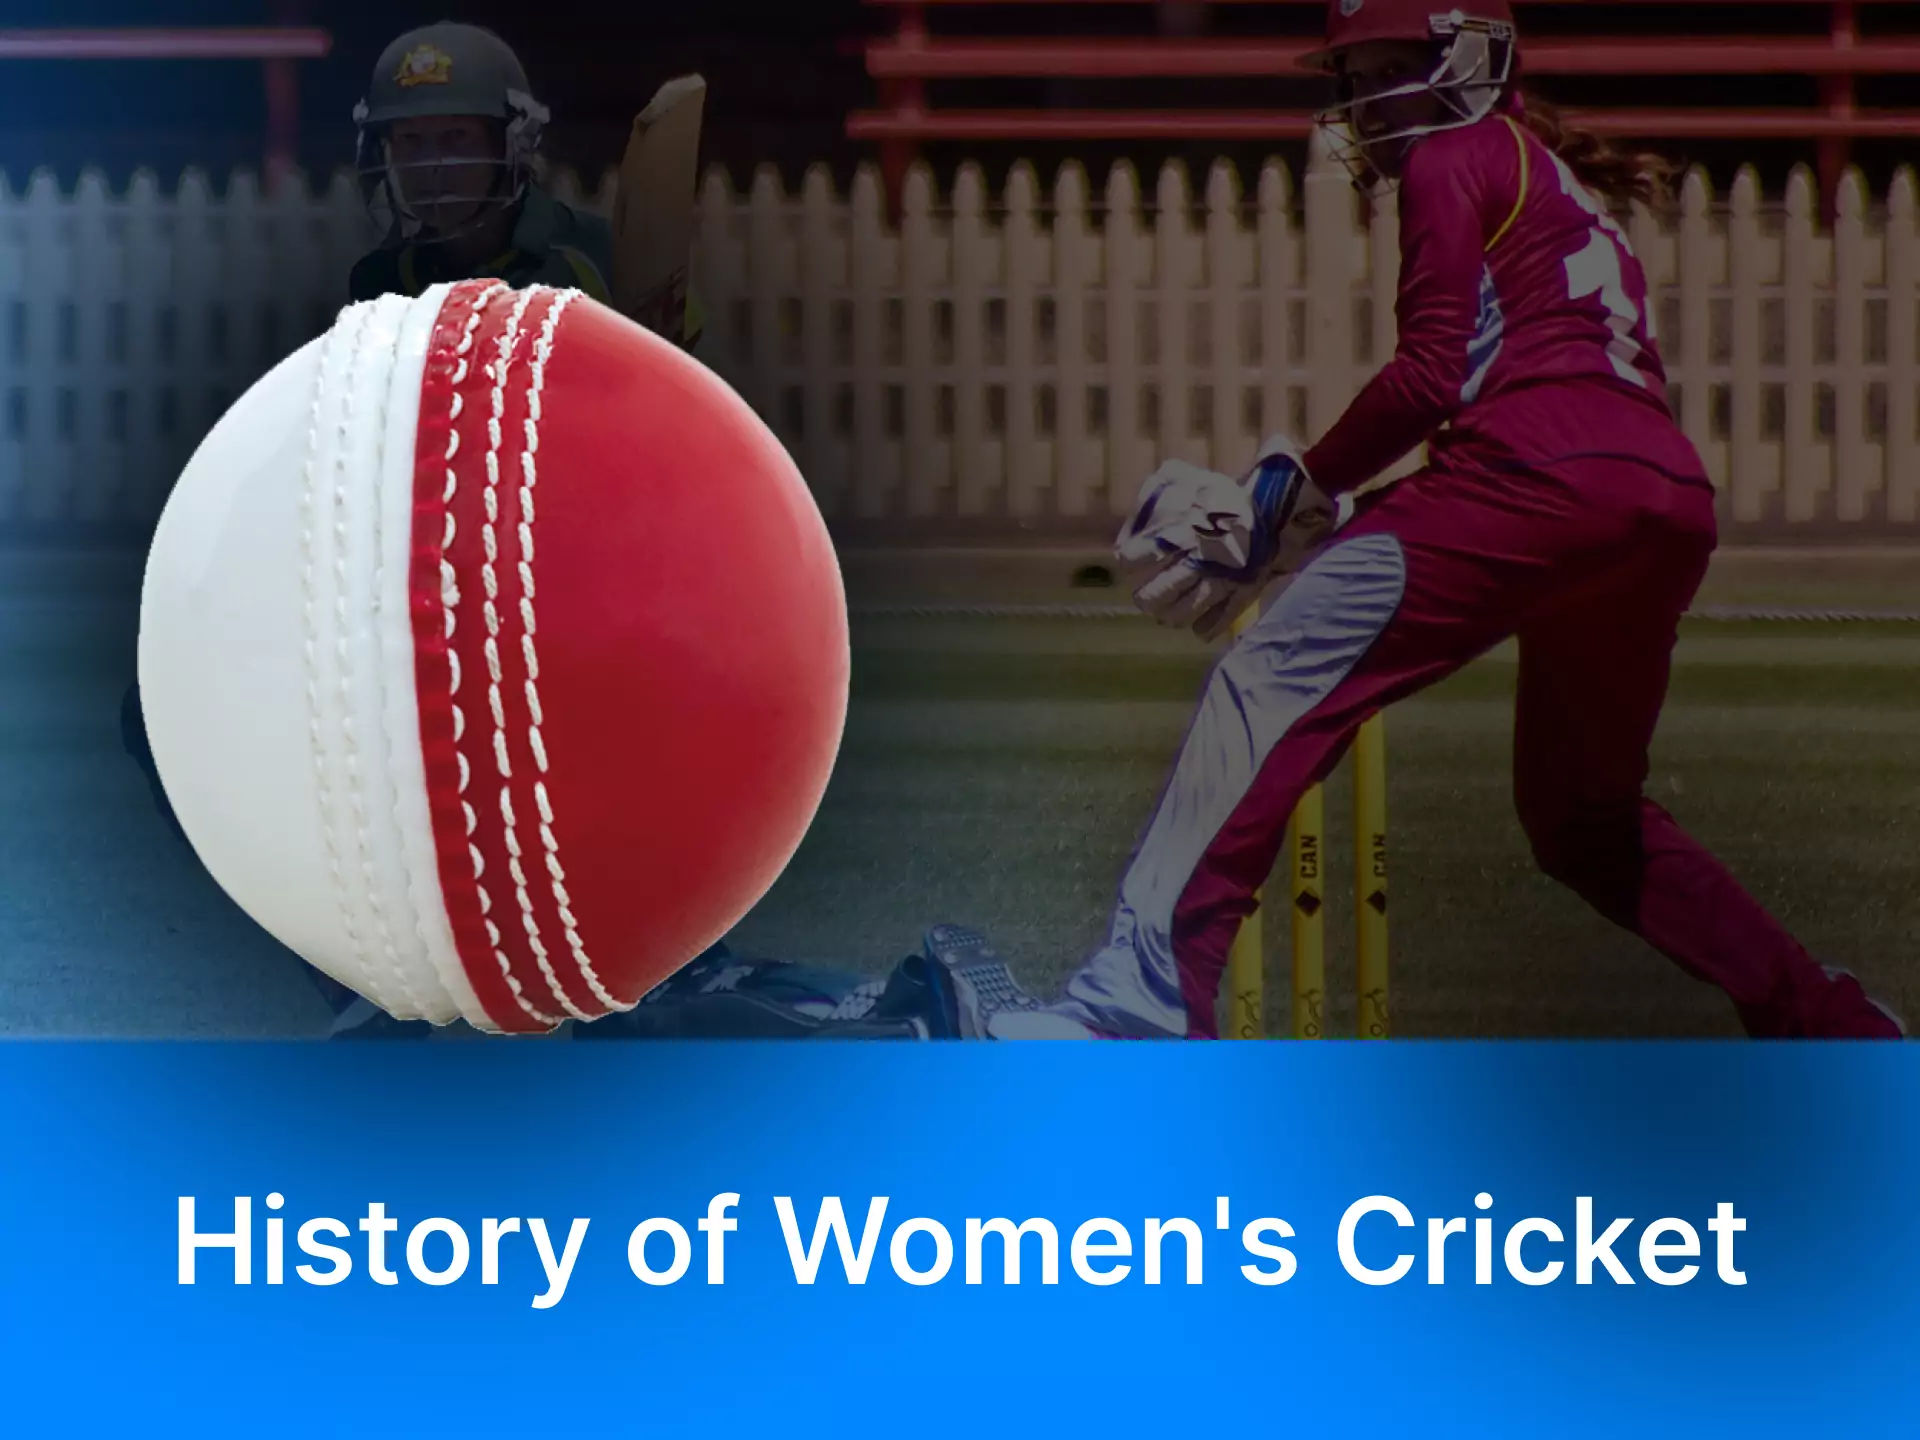 Learn about the history of women's cricket.